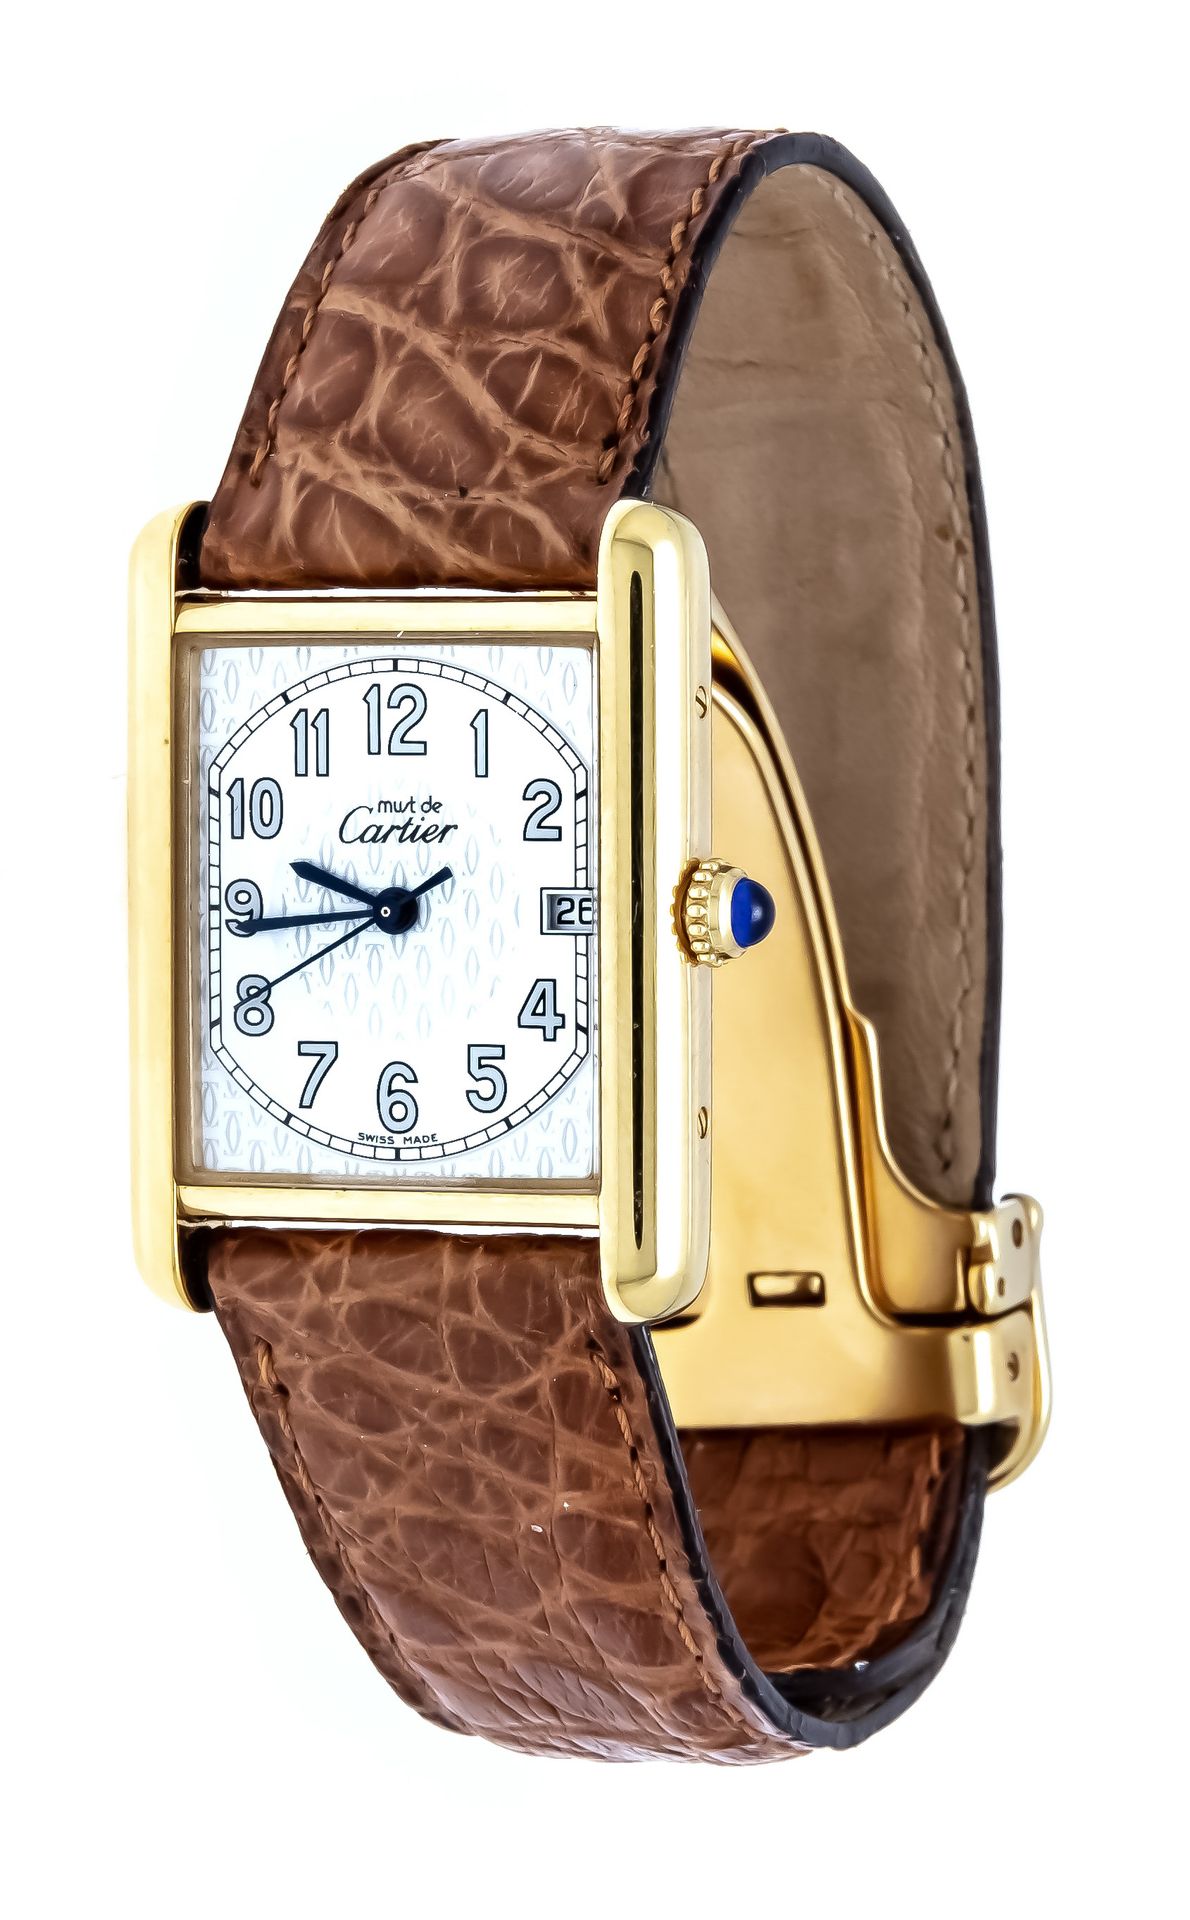 Null Cartier Tank, 925/000 silver with 18k gold plated, ref. 2413, quartz watch,&hellip;